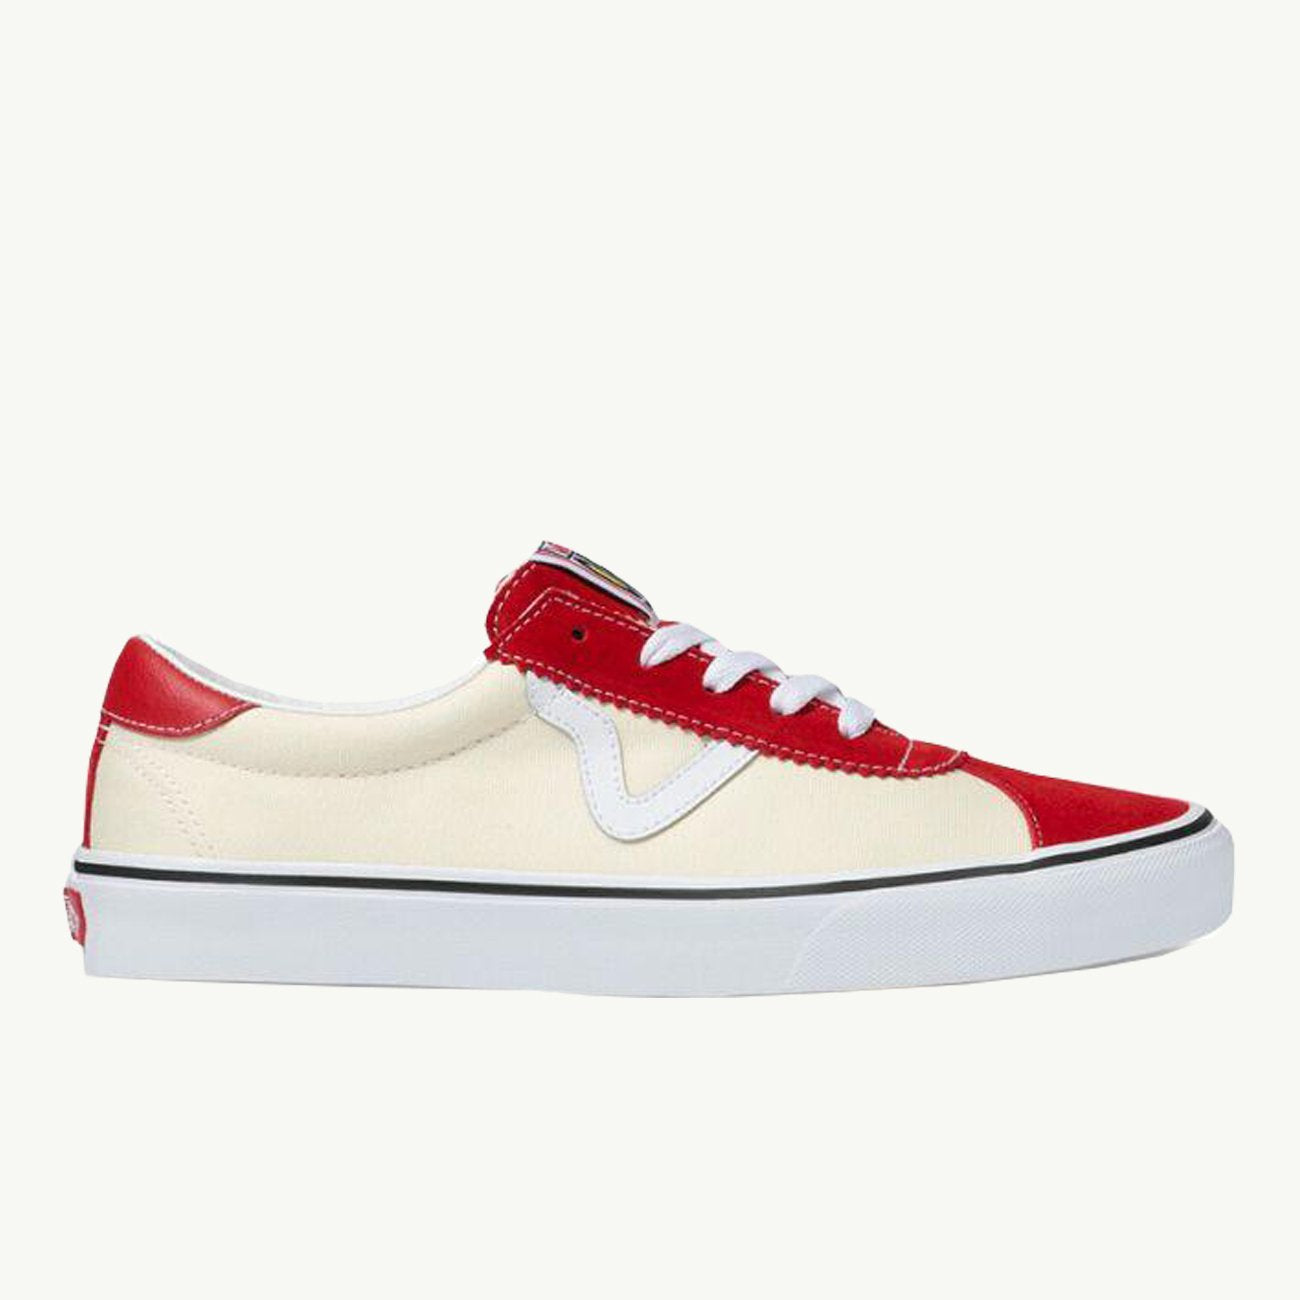 SPORT RACING RED CLASSIC WHITE